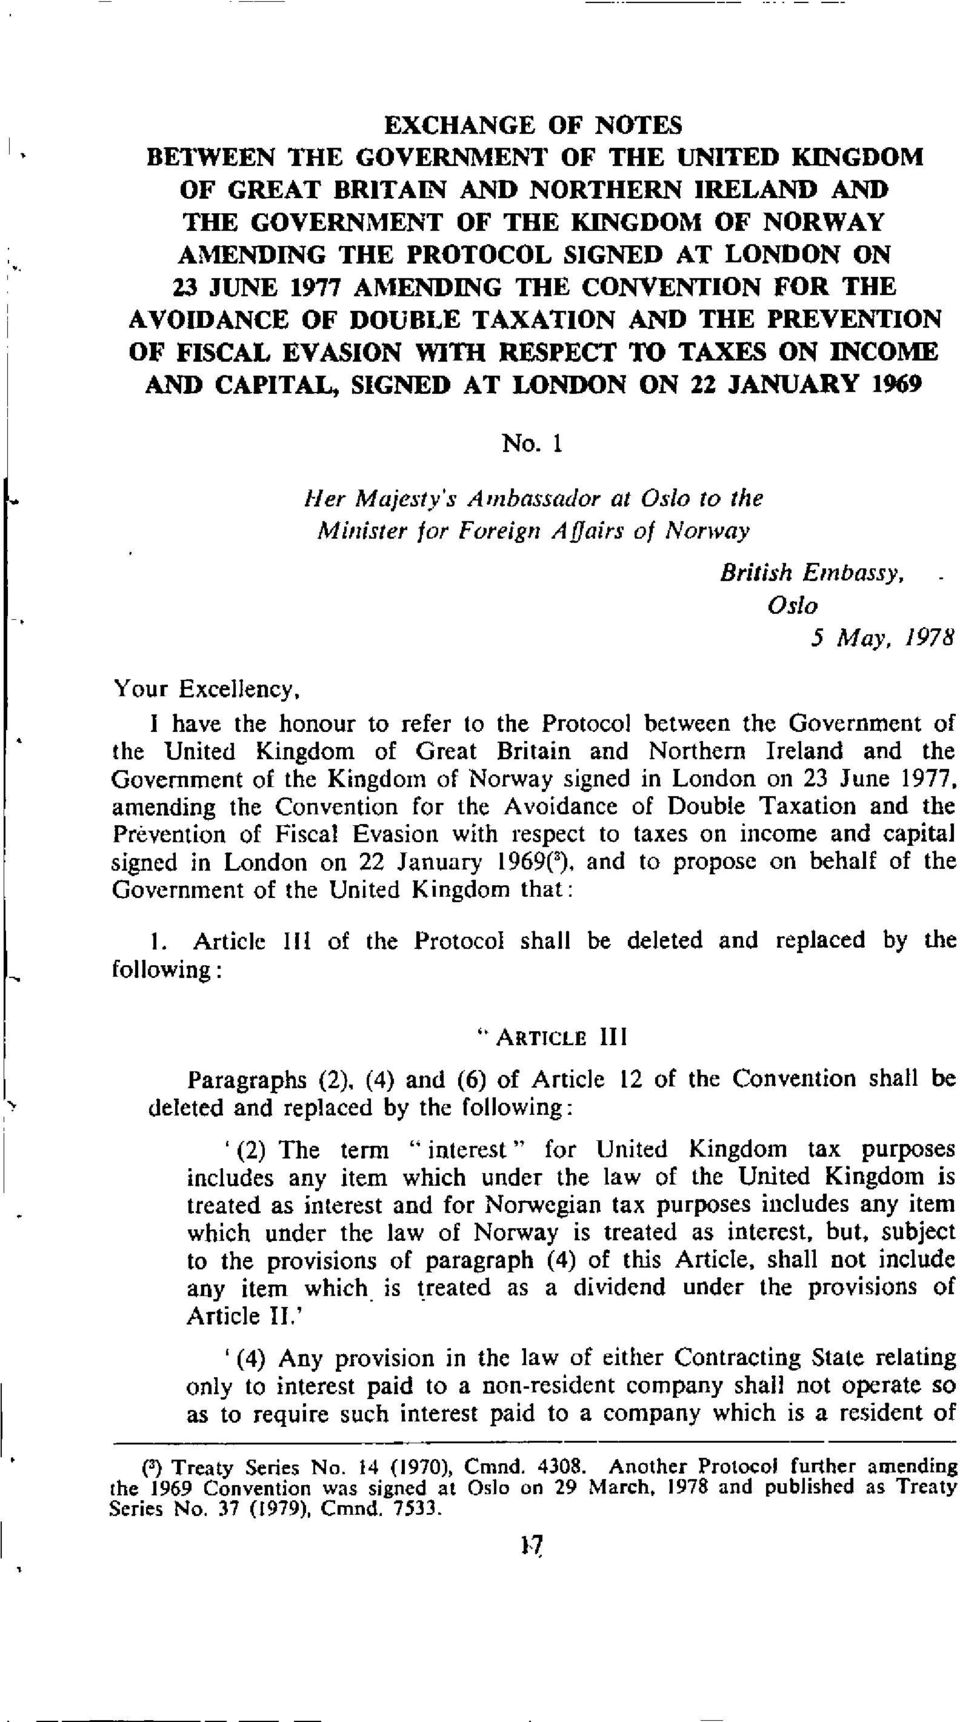 1 Her Majesty's Ambassador at Oslo to the Minister for Foreign Affairs of Norway British Embassy, Oslo 5 May, 1978 Your Excellency, I have the honour to refer to the Protocol between the Government